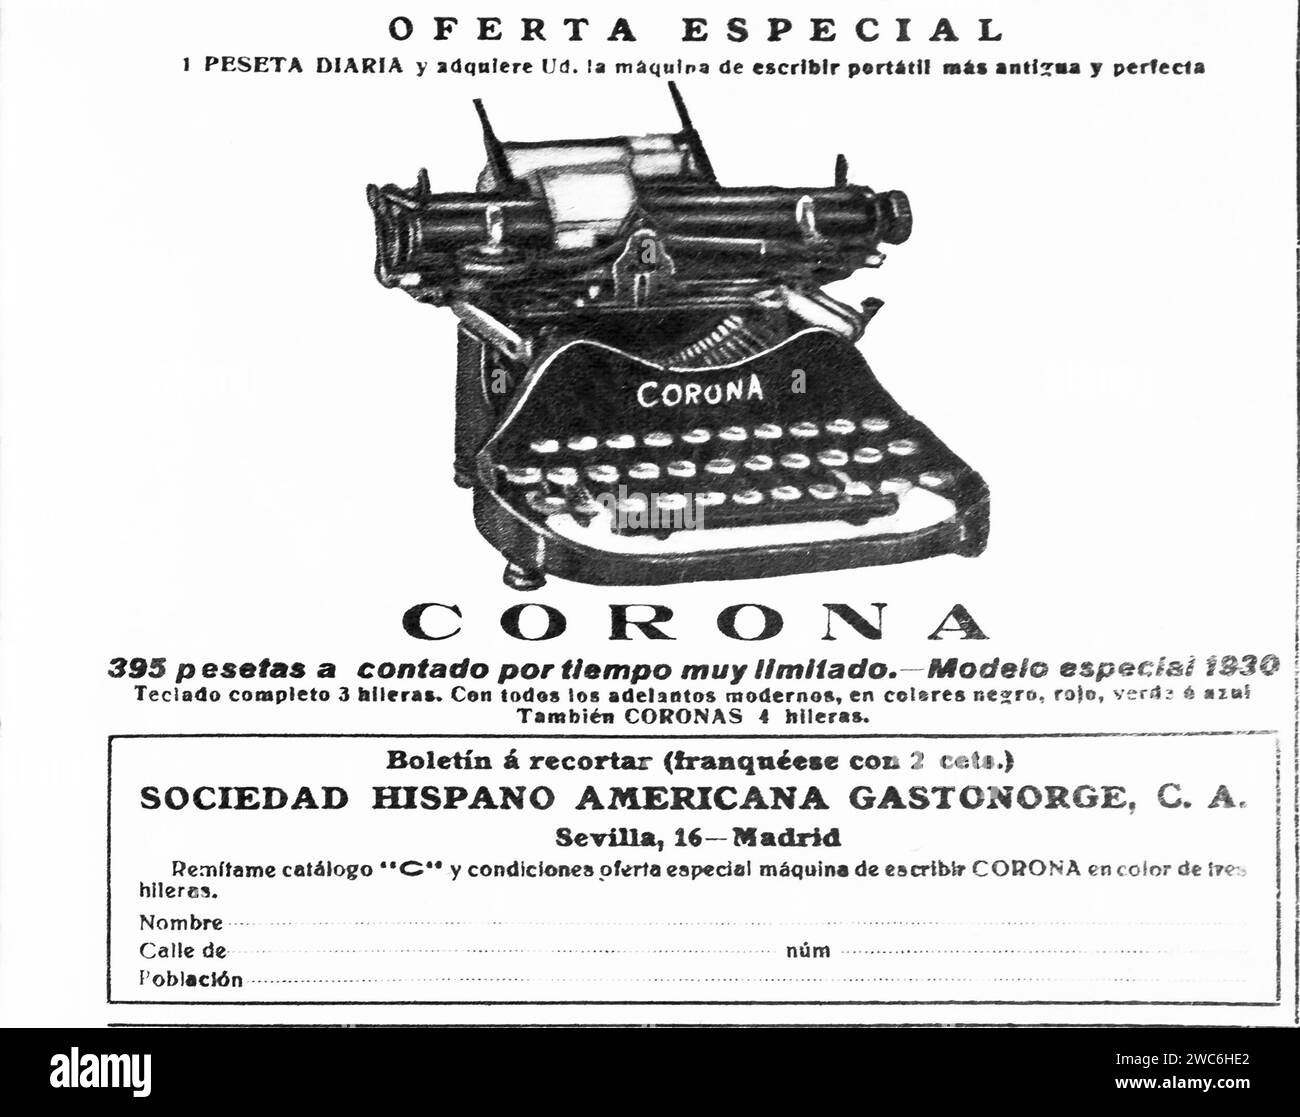 This 1930 image showcases an early-20th-century advertisement for a black Corona typewriter, listing pricing and a detailed illustration of the machine, with text in Spanish. Stock Photo